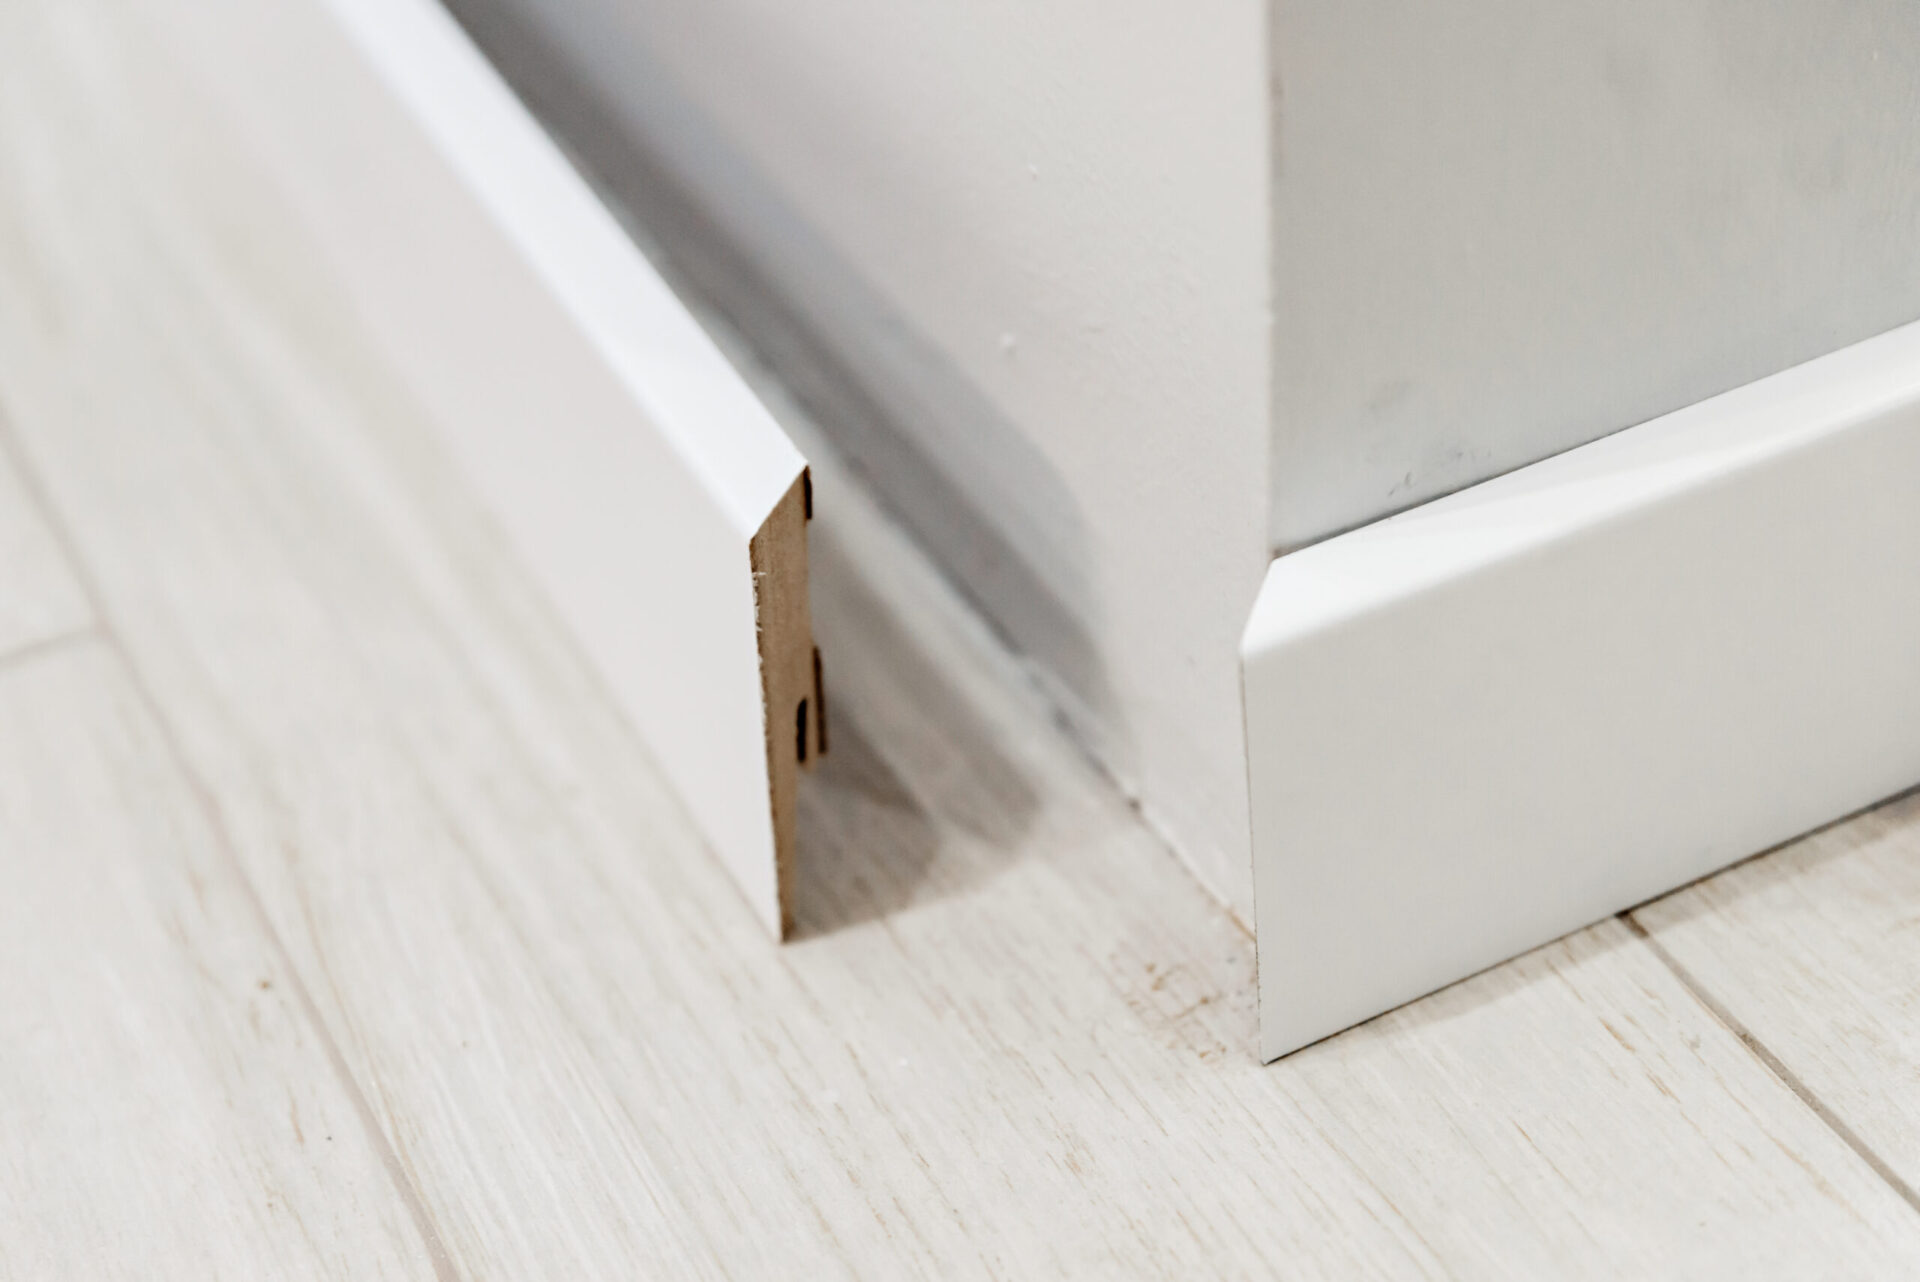 How To Install Molding On Floor